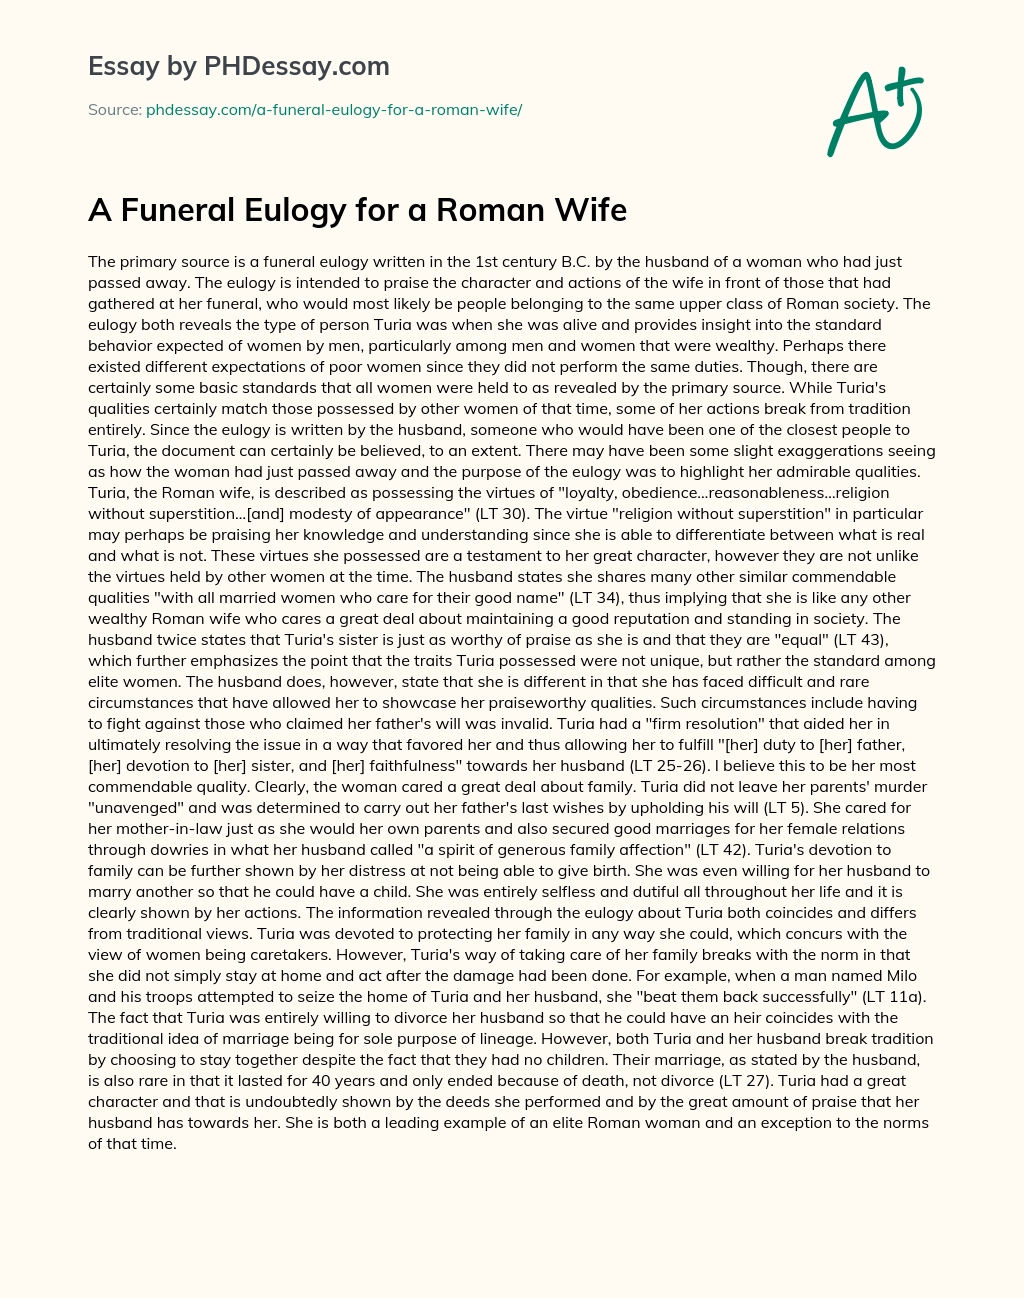 A Funeral Eulogy for a Roman Wife essay